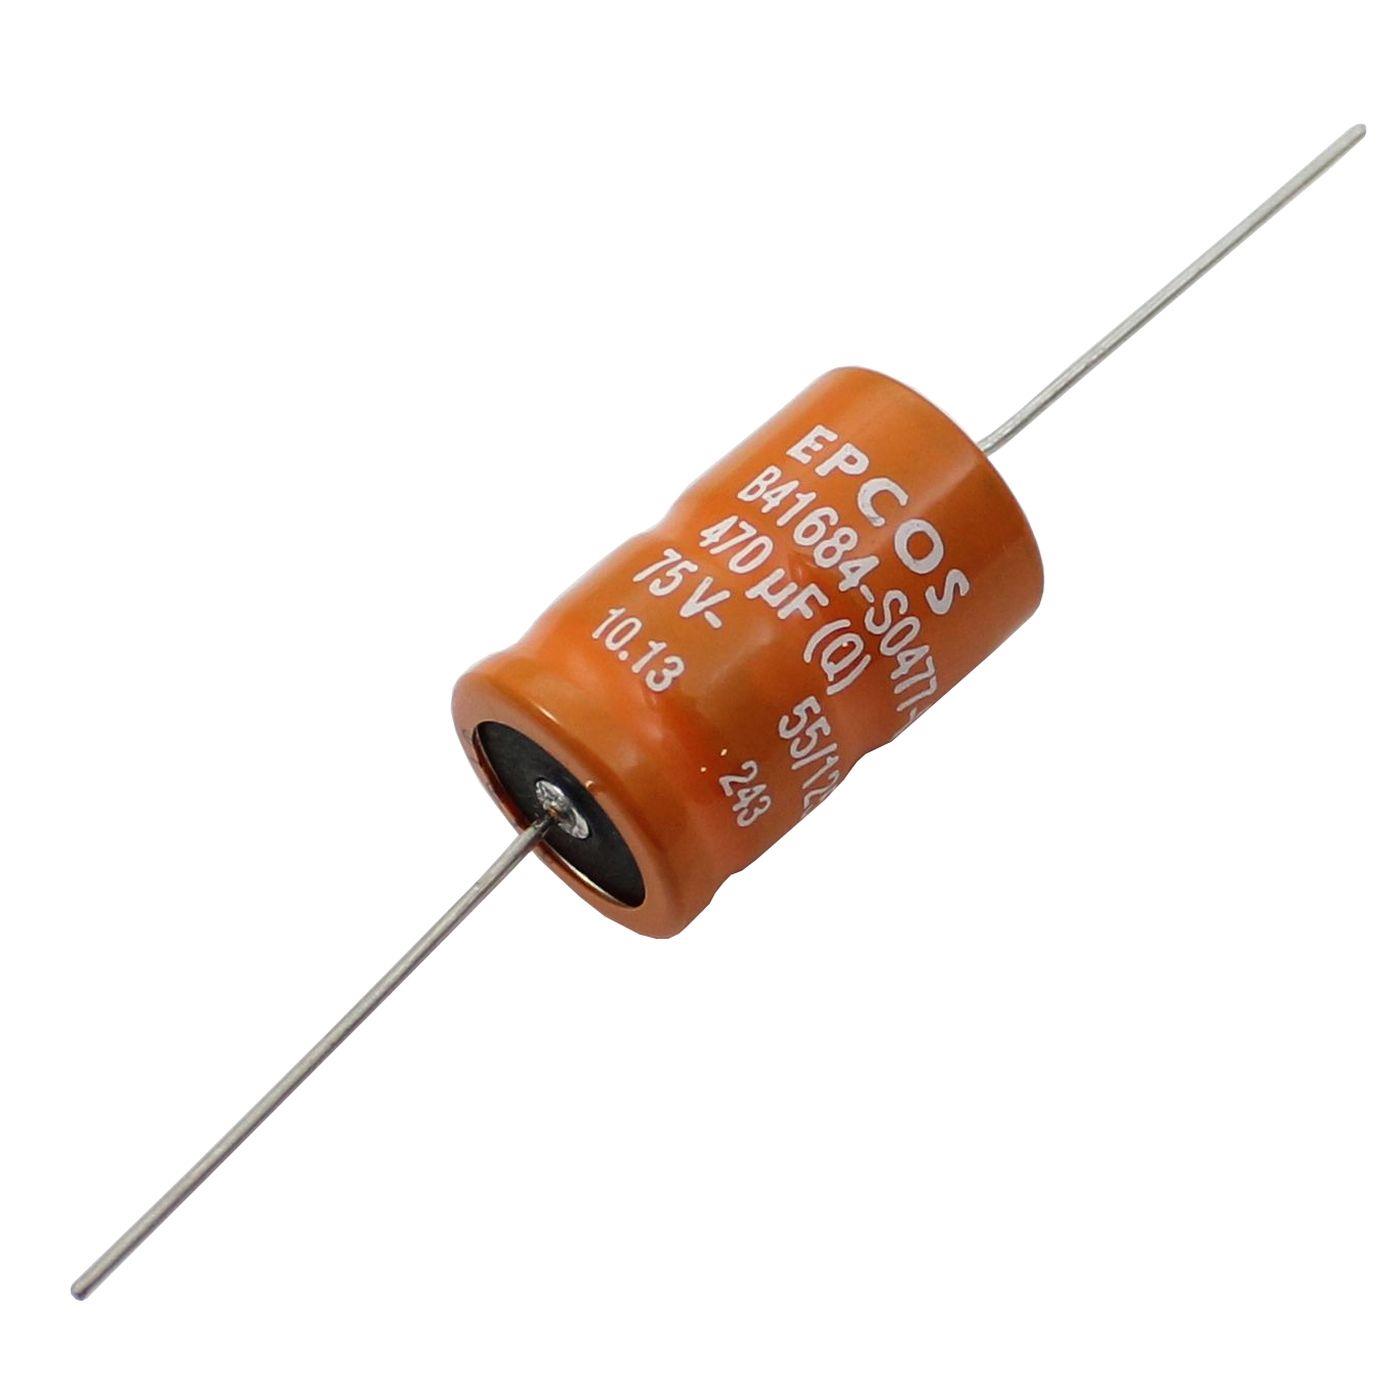 Electrolytic capacitor Axially 470µF 75V 125°C B41684S477Q1 470uF